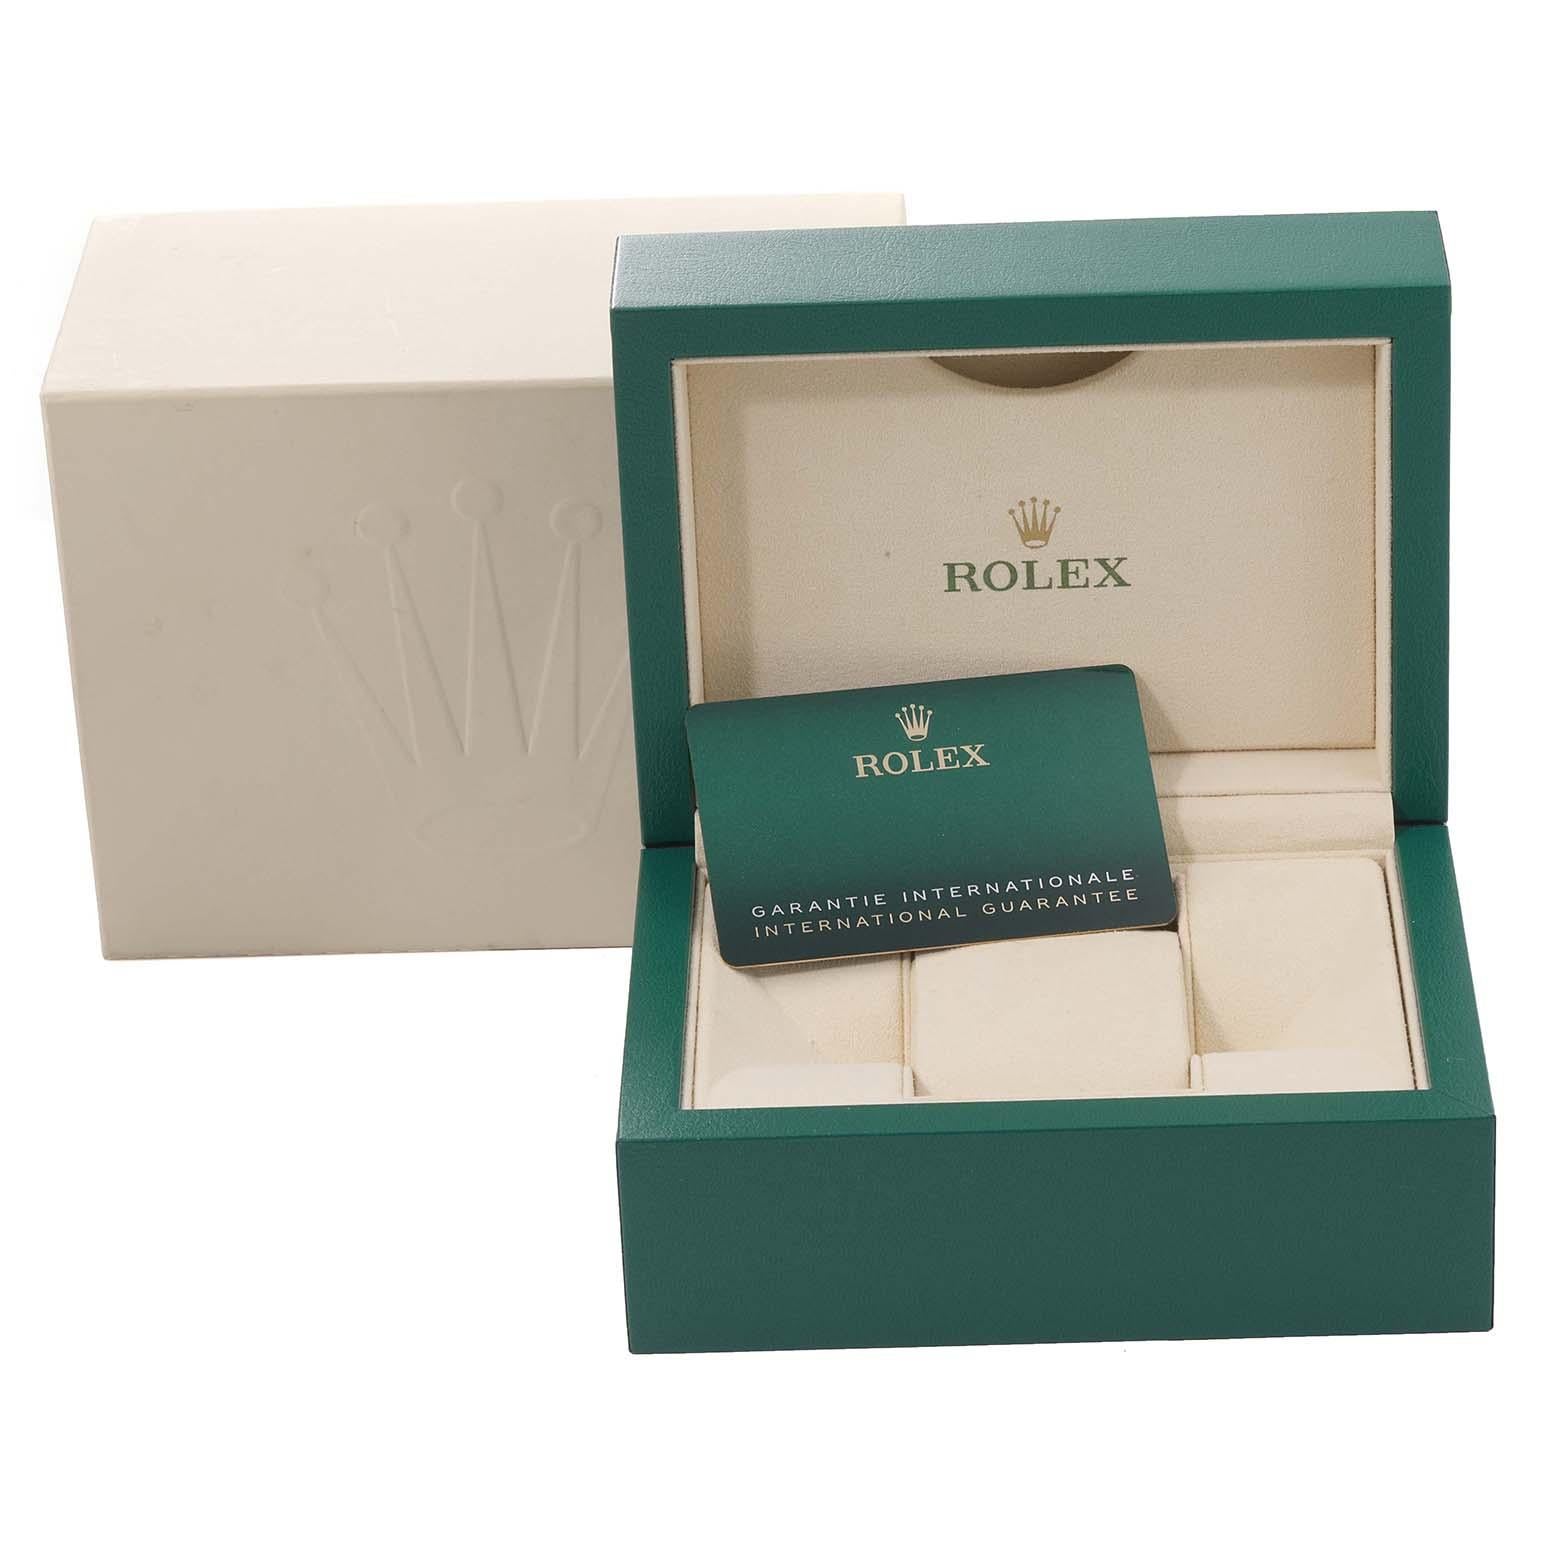 Rolex Oyster Perpetual Air King Green Hand Steel Mens Watch 116900 Box Card 8